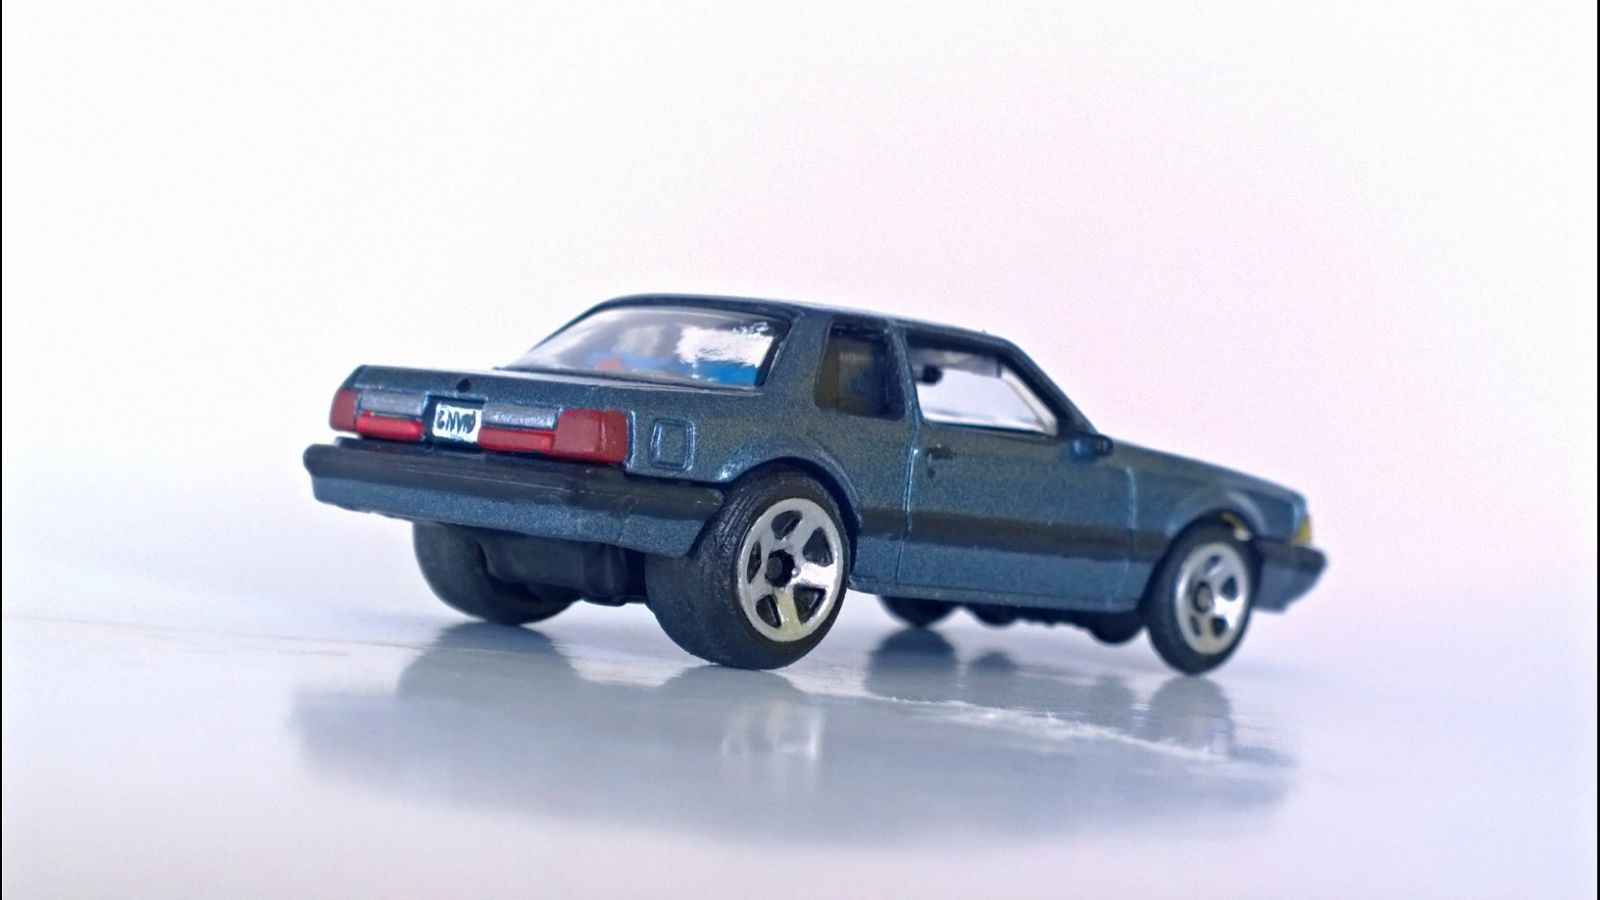 Illustration for article titled Finally finished! My Matchbox Mustang Coupe custom!!